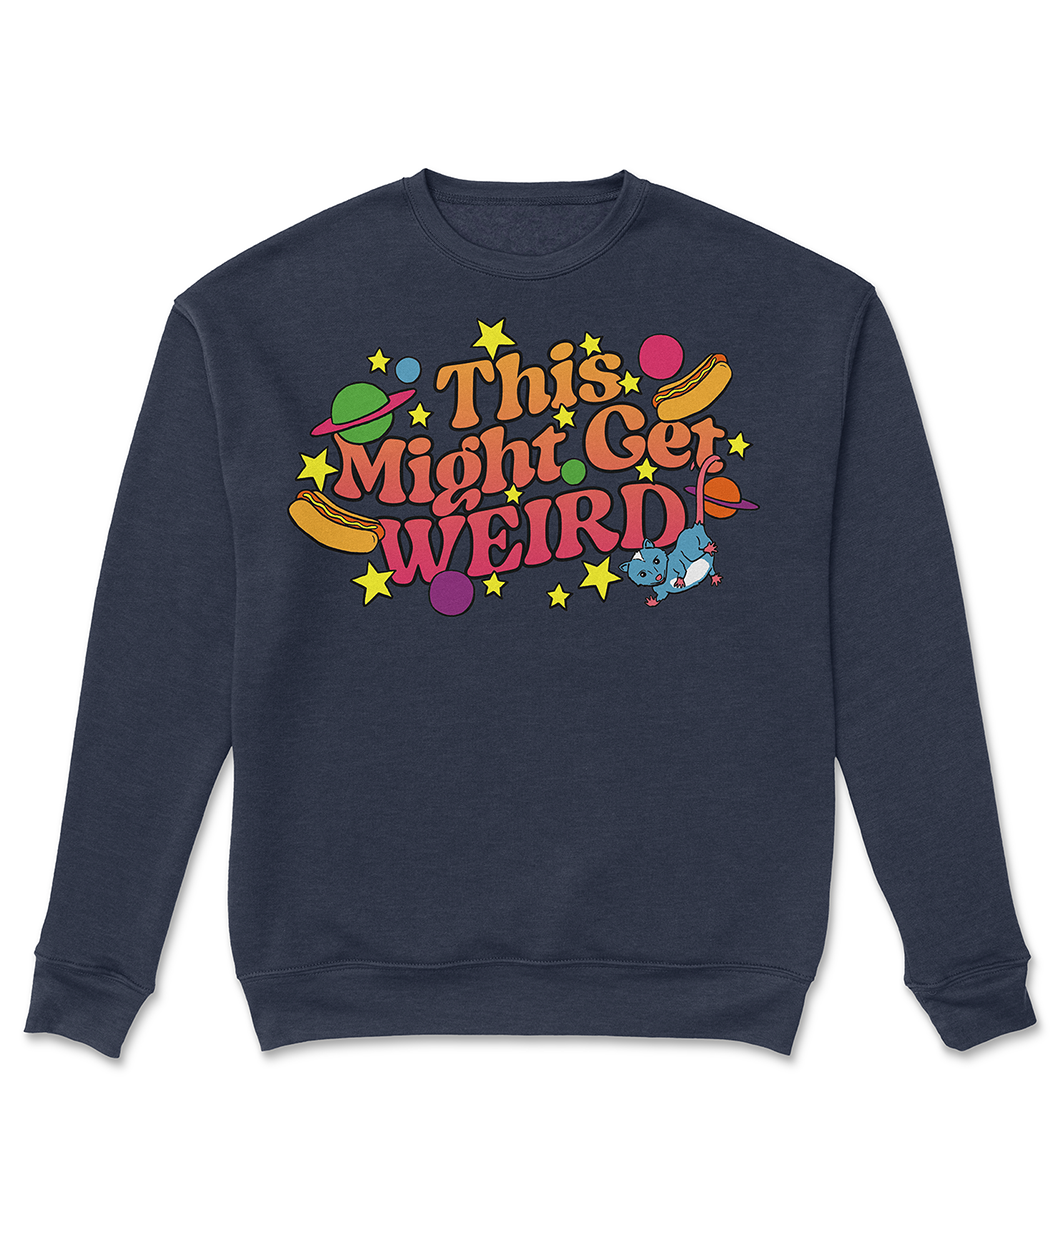 A dark blue crewneck with fun, curvy, gradient orange and pink text that reads 